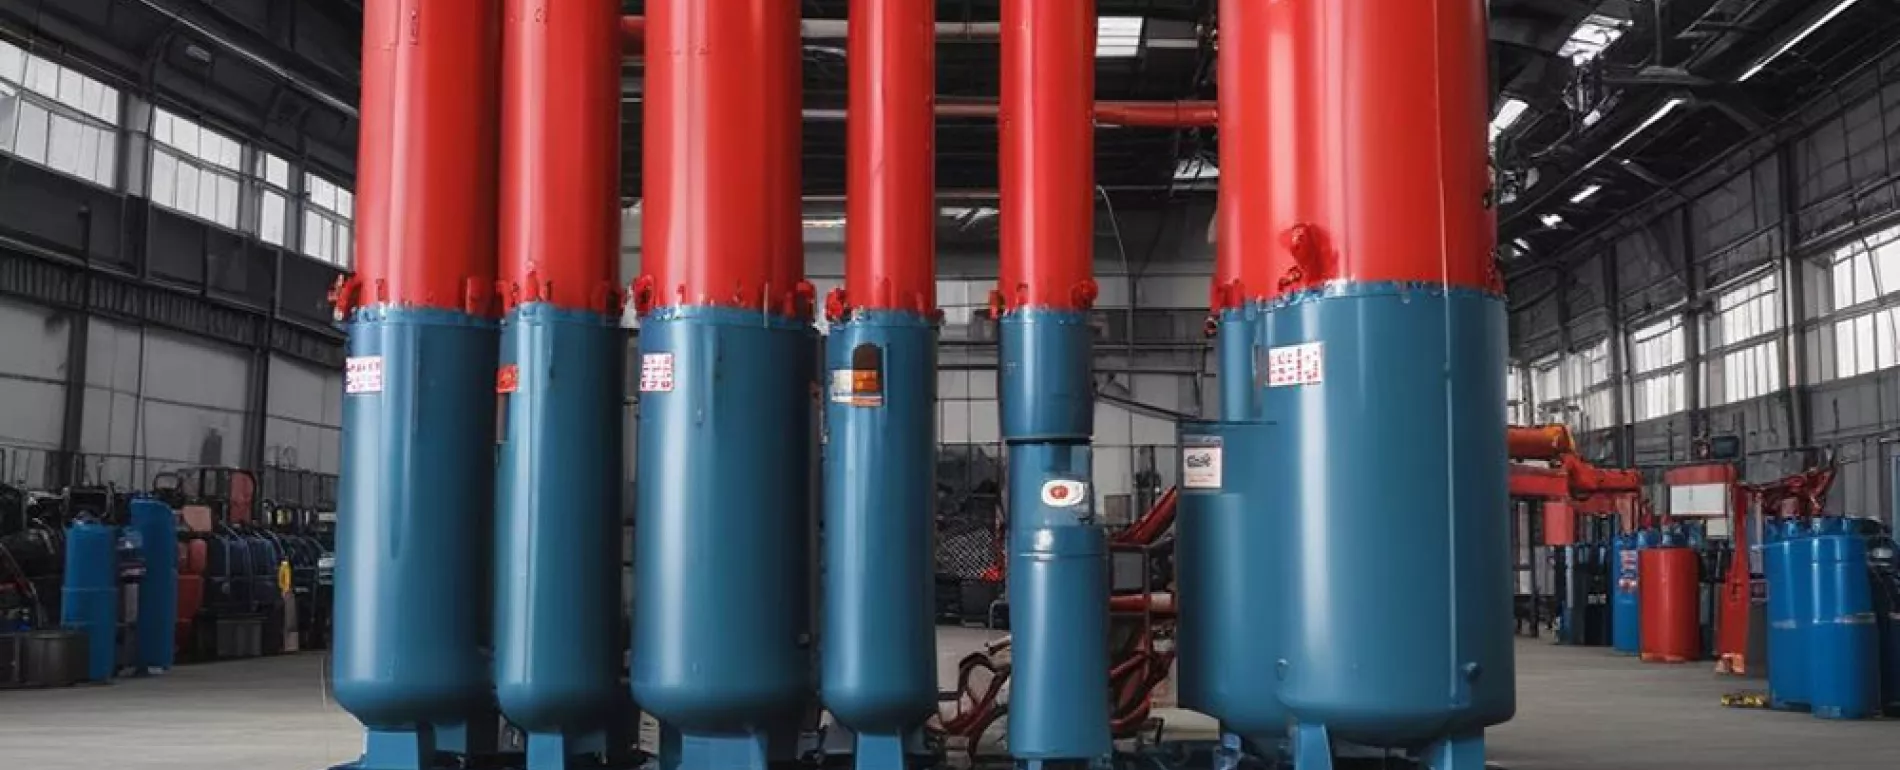 Air compressor technologies and compressed air treatment systems